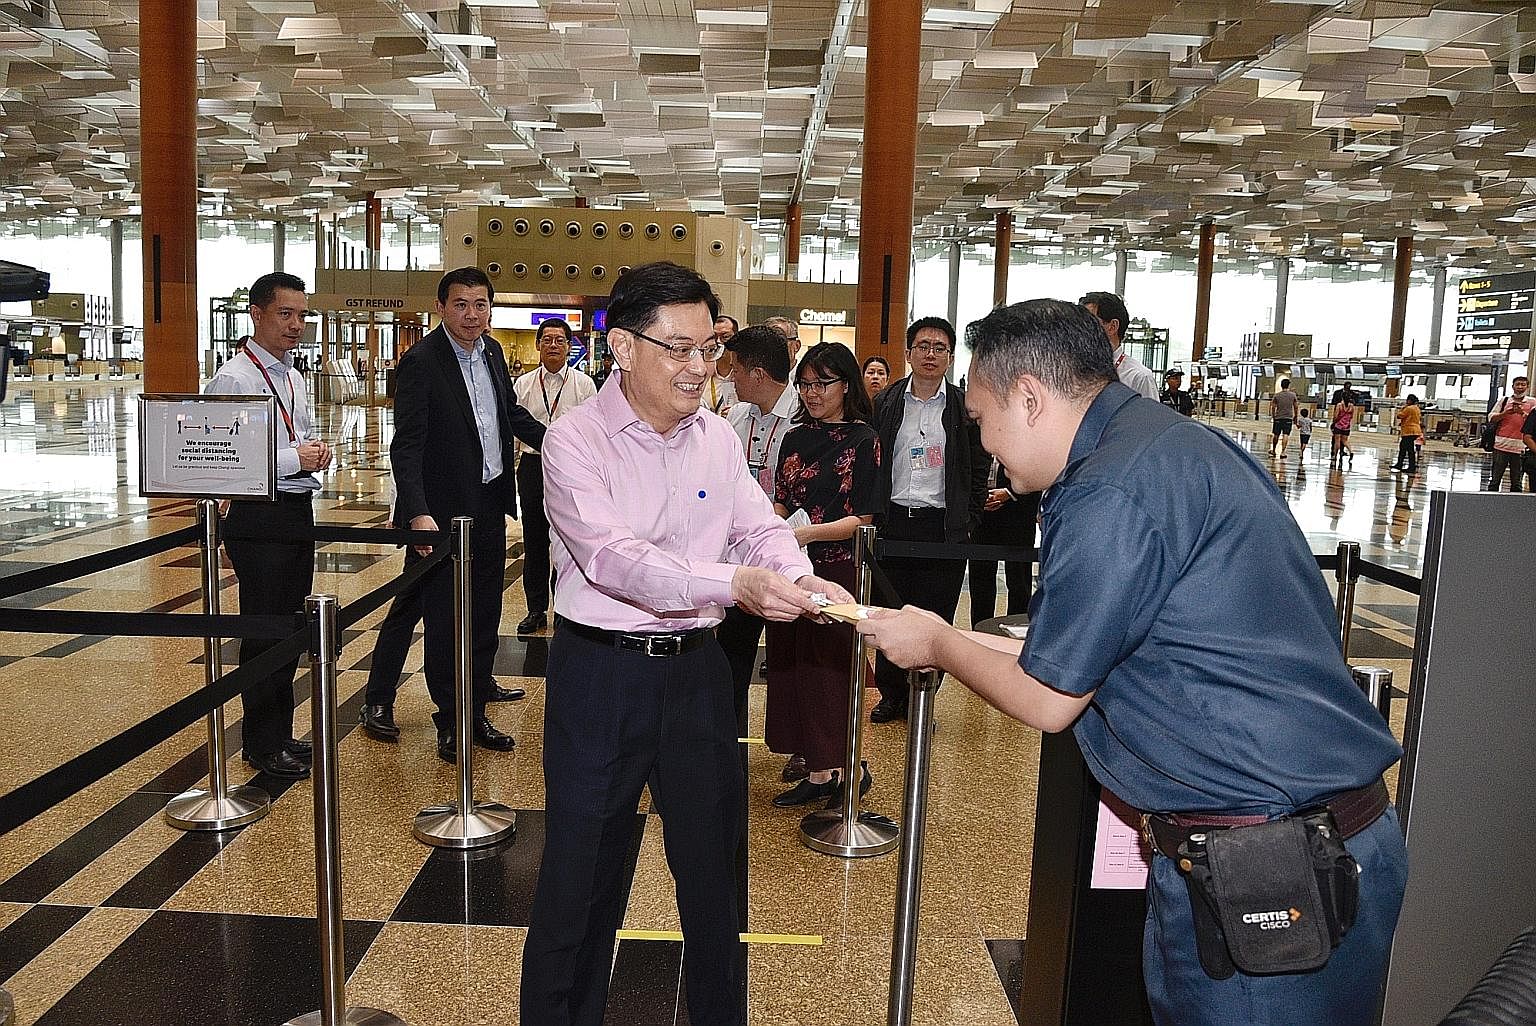 Deputy Prime Minister Heng Swee Keat giving a packet of cookies and an SG United badge from the Civil Aviation Authority of Singapore, packed by Metta alumni youth with special needs, to Certis auxiliary policeman Mohd Nizam at Changi Airport yesterd